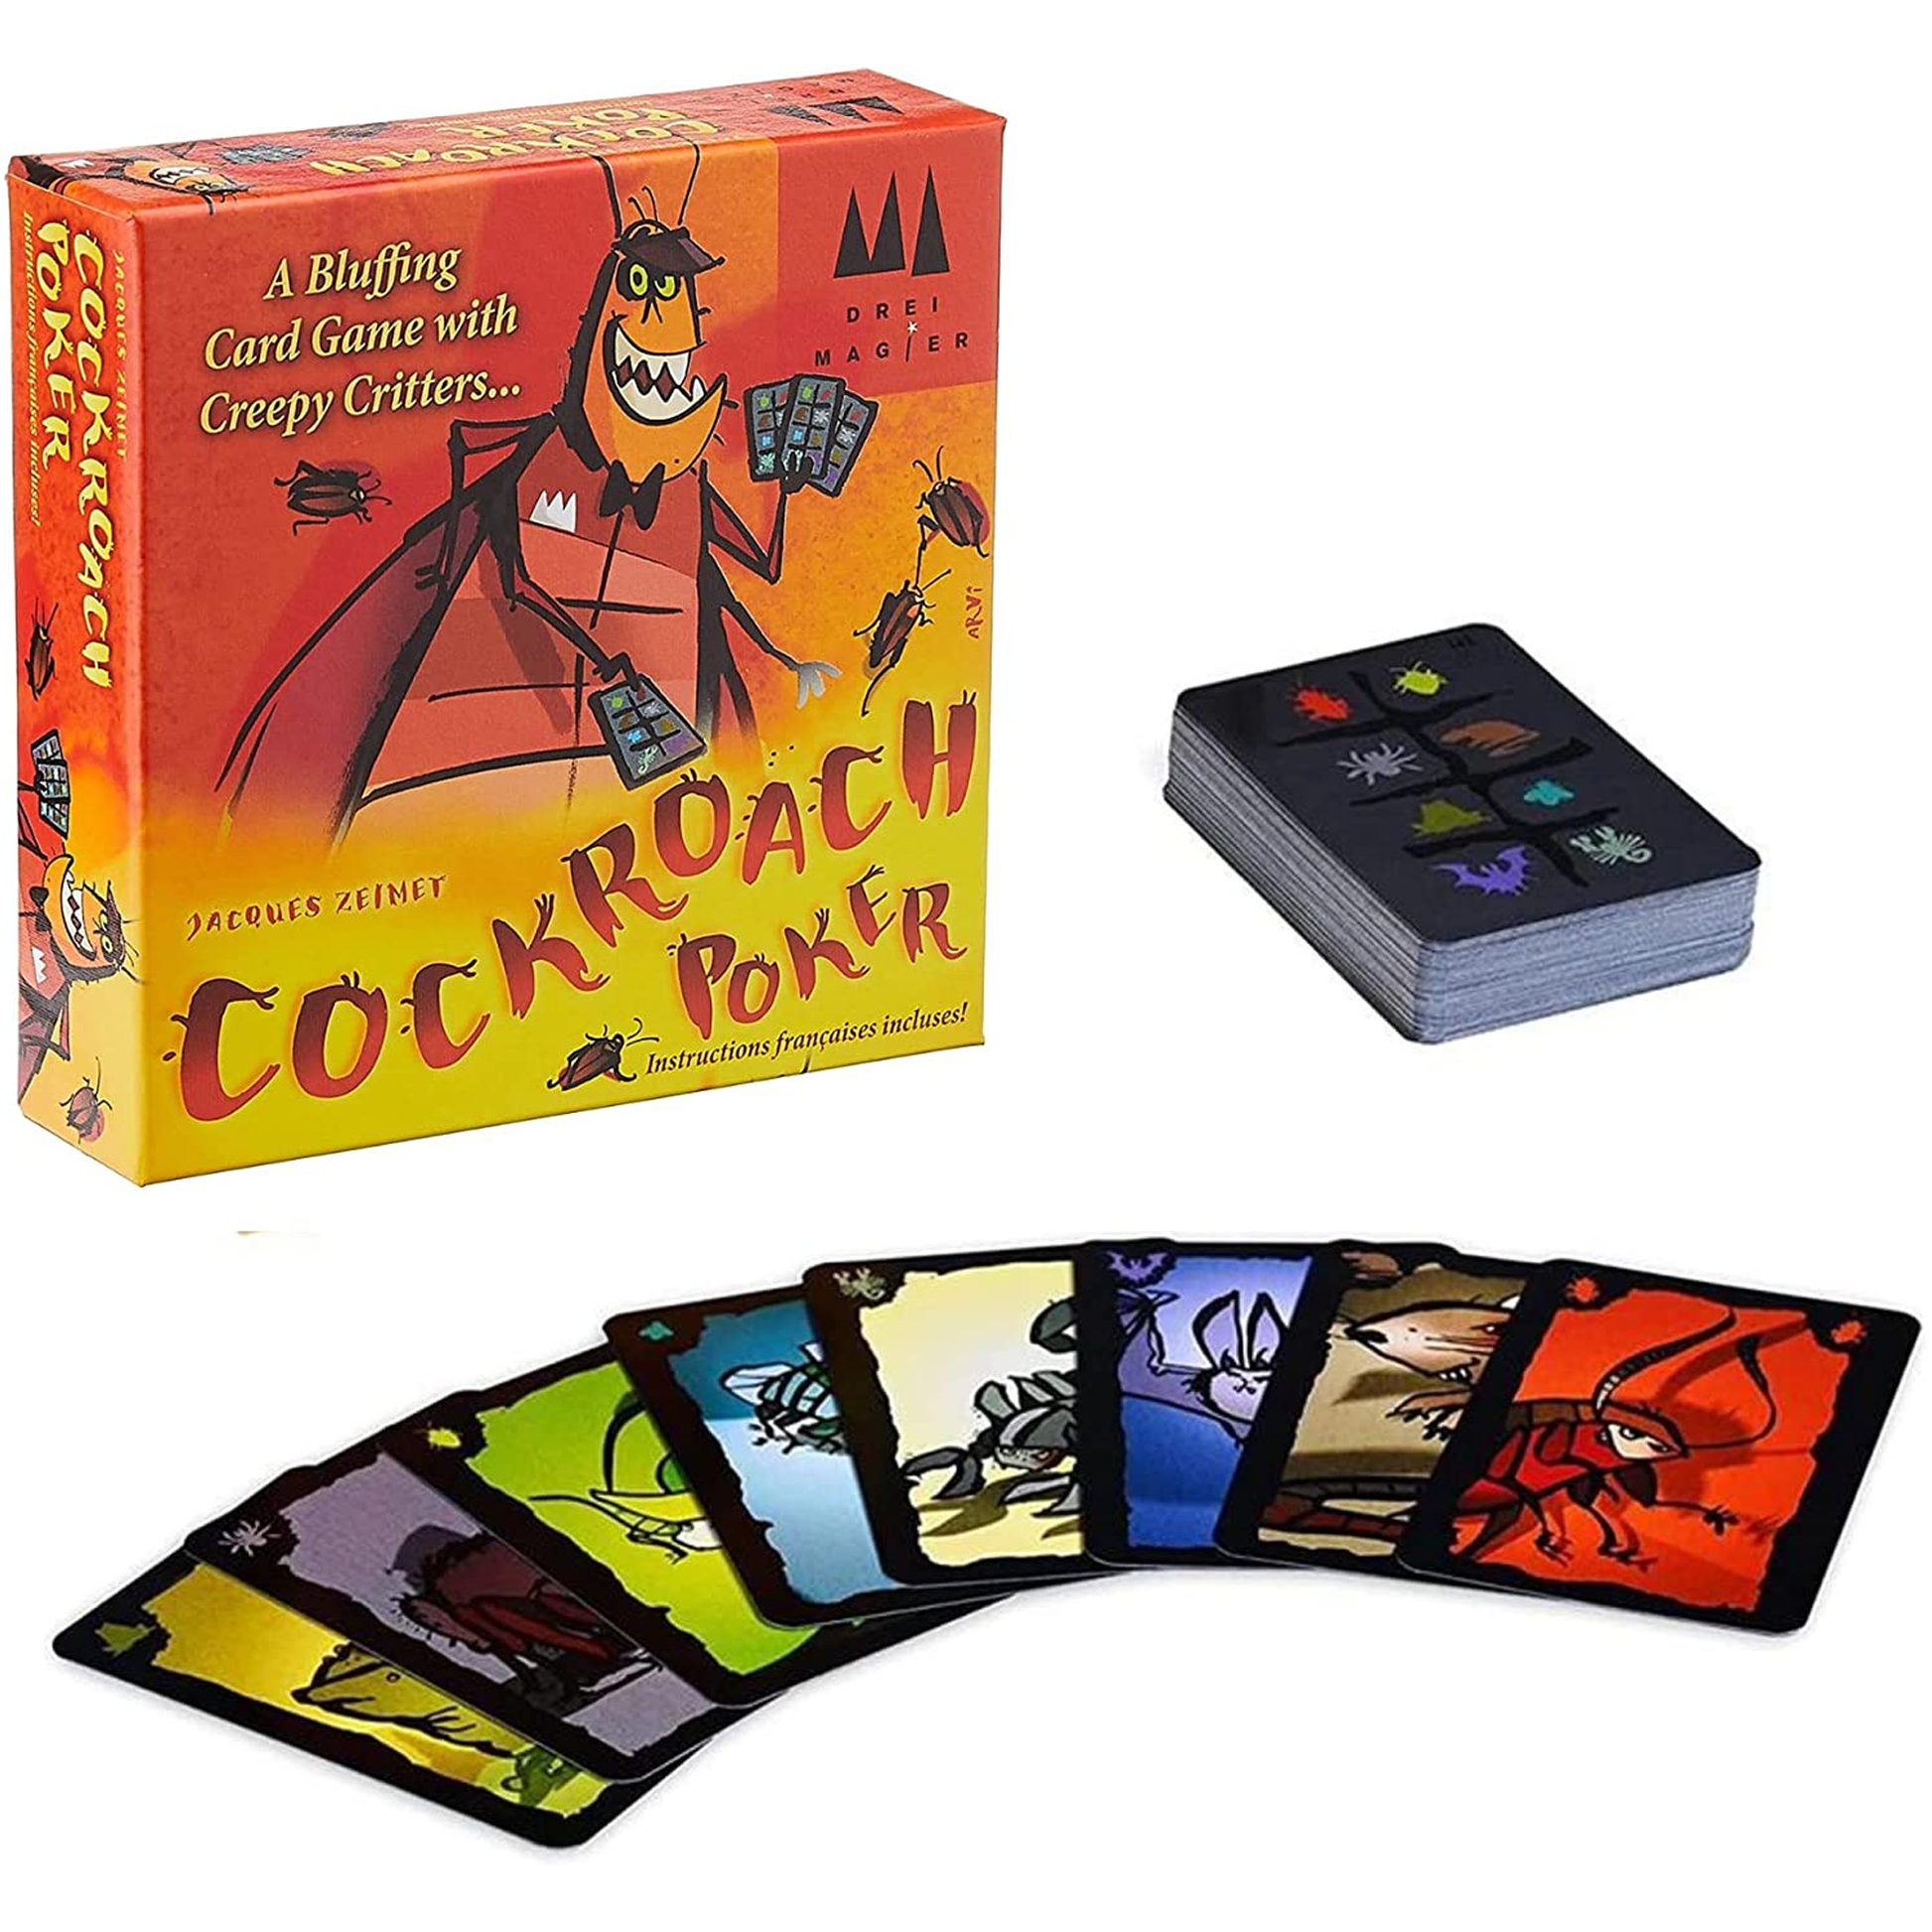 Cockroach Poker Card Game Box and Contents | Happy Piranha